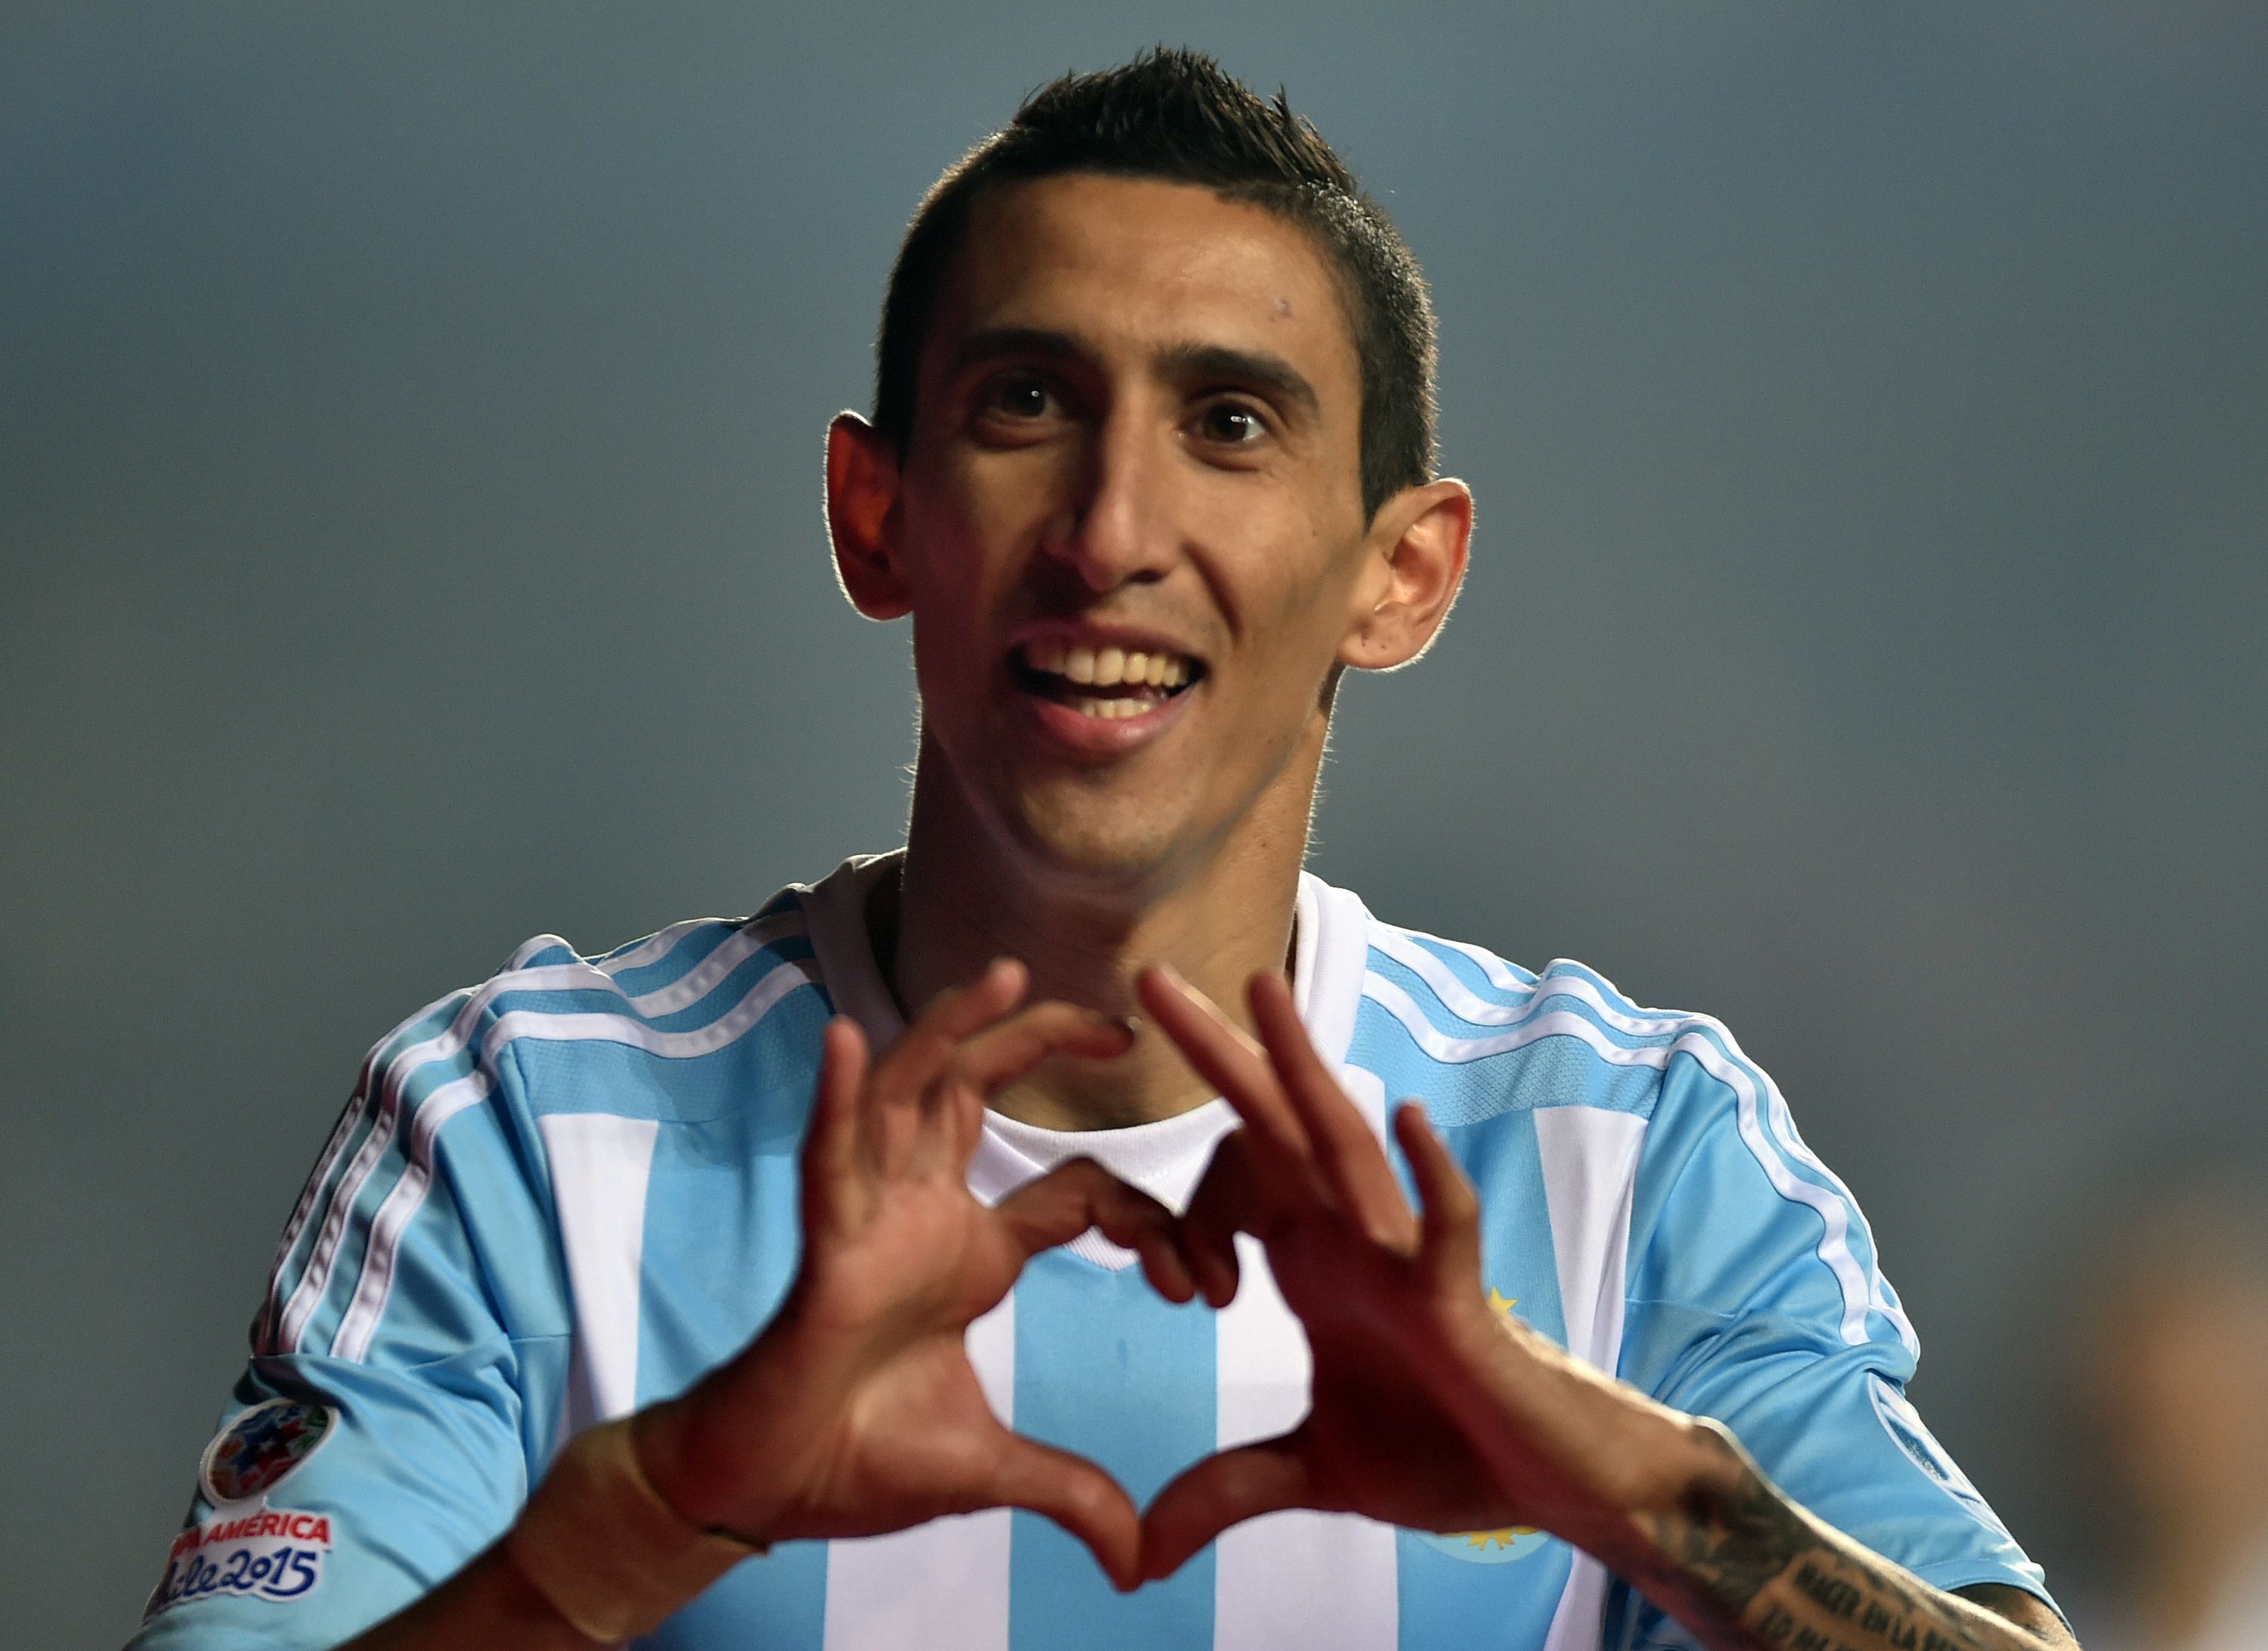 Angel di Maria celebrates one of his two goals against Chile. Photo: AFP